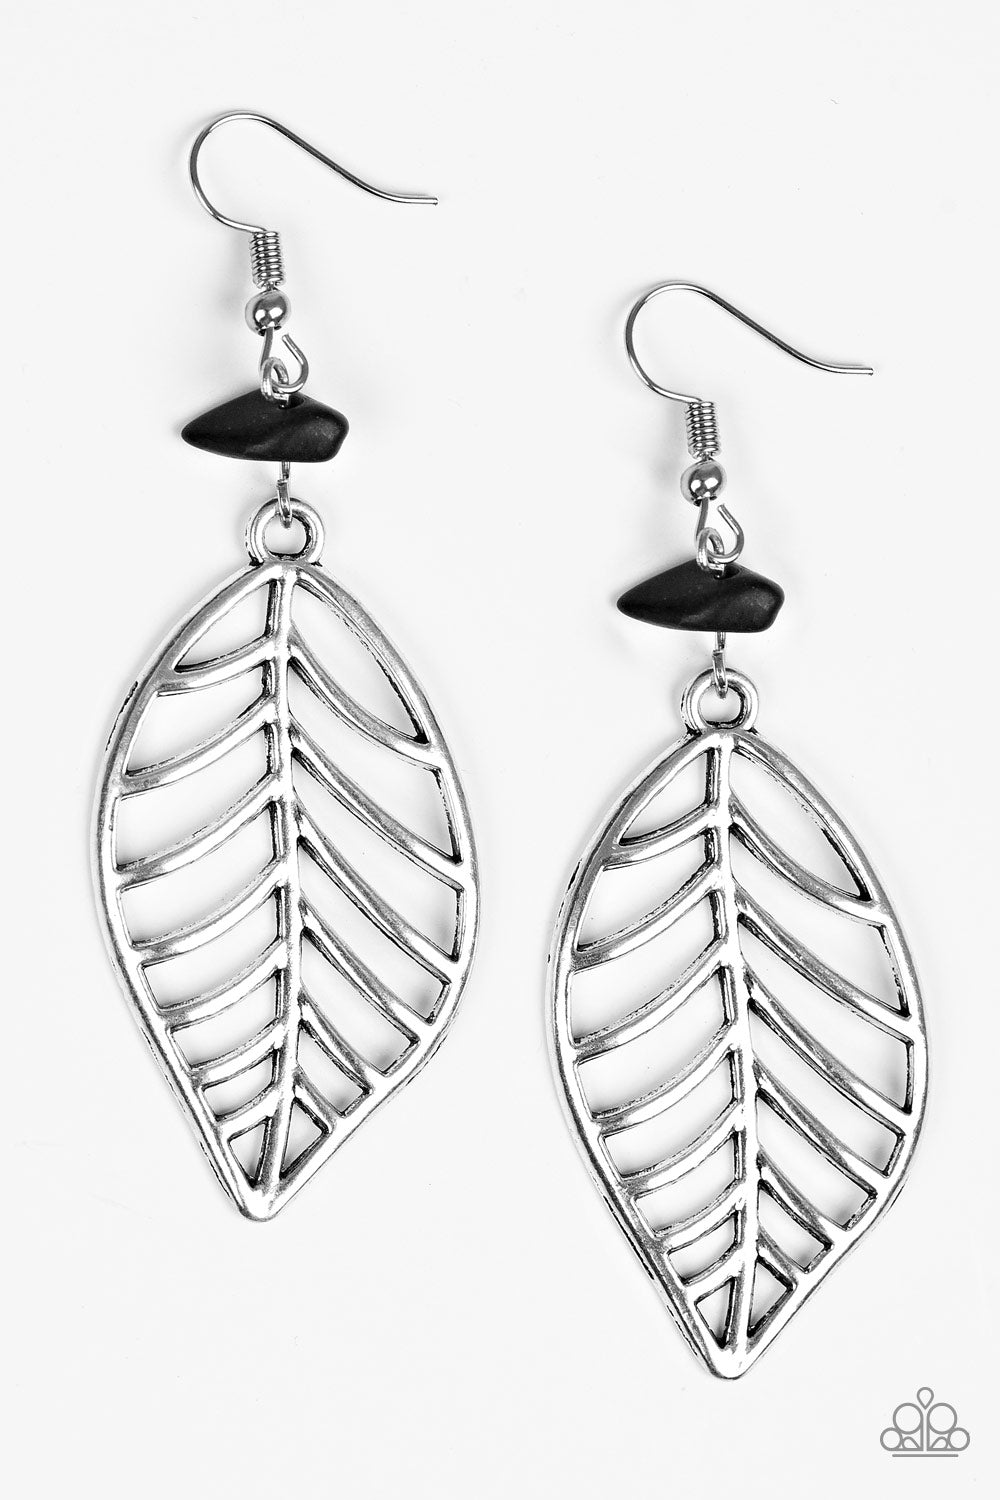 Paparazzi BOUGH Out - Black - Silver Leaf Earrings - $5 Jewelry With Ashley Swint